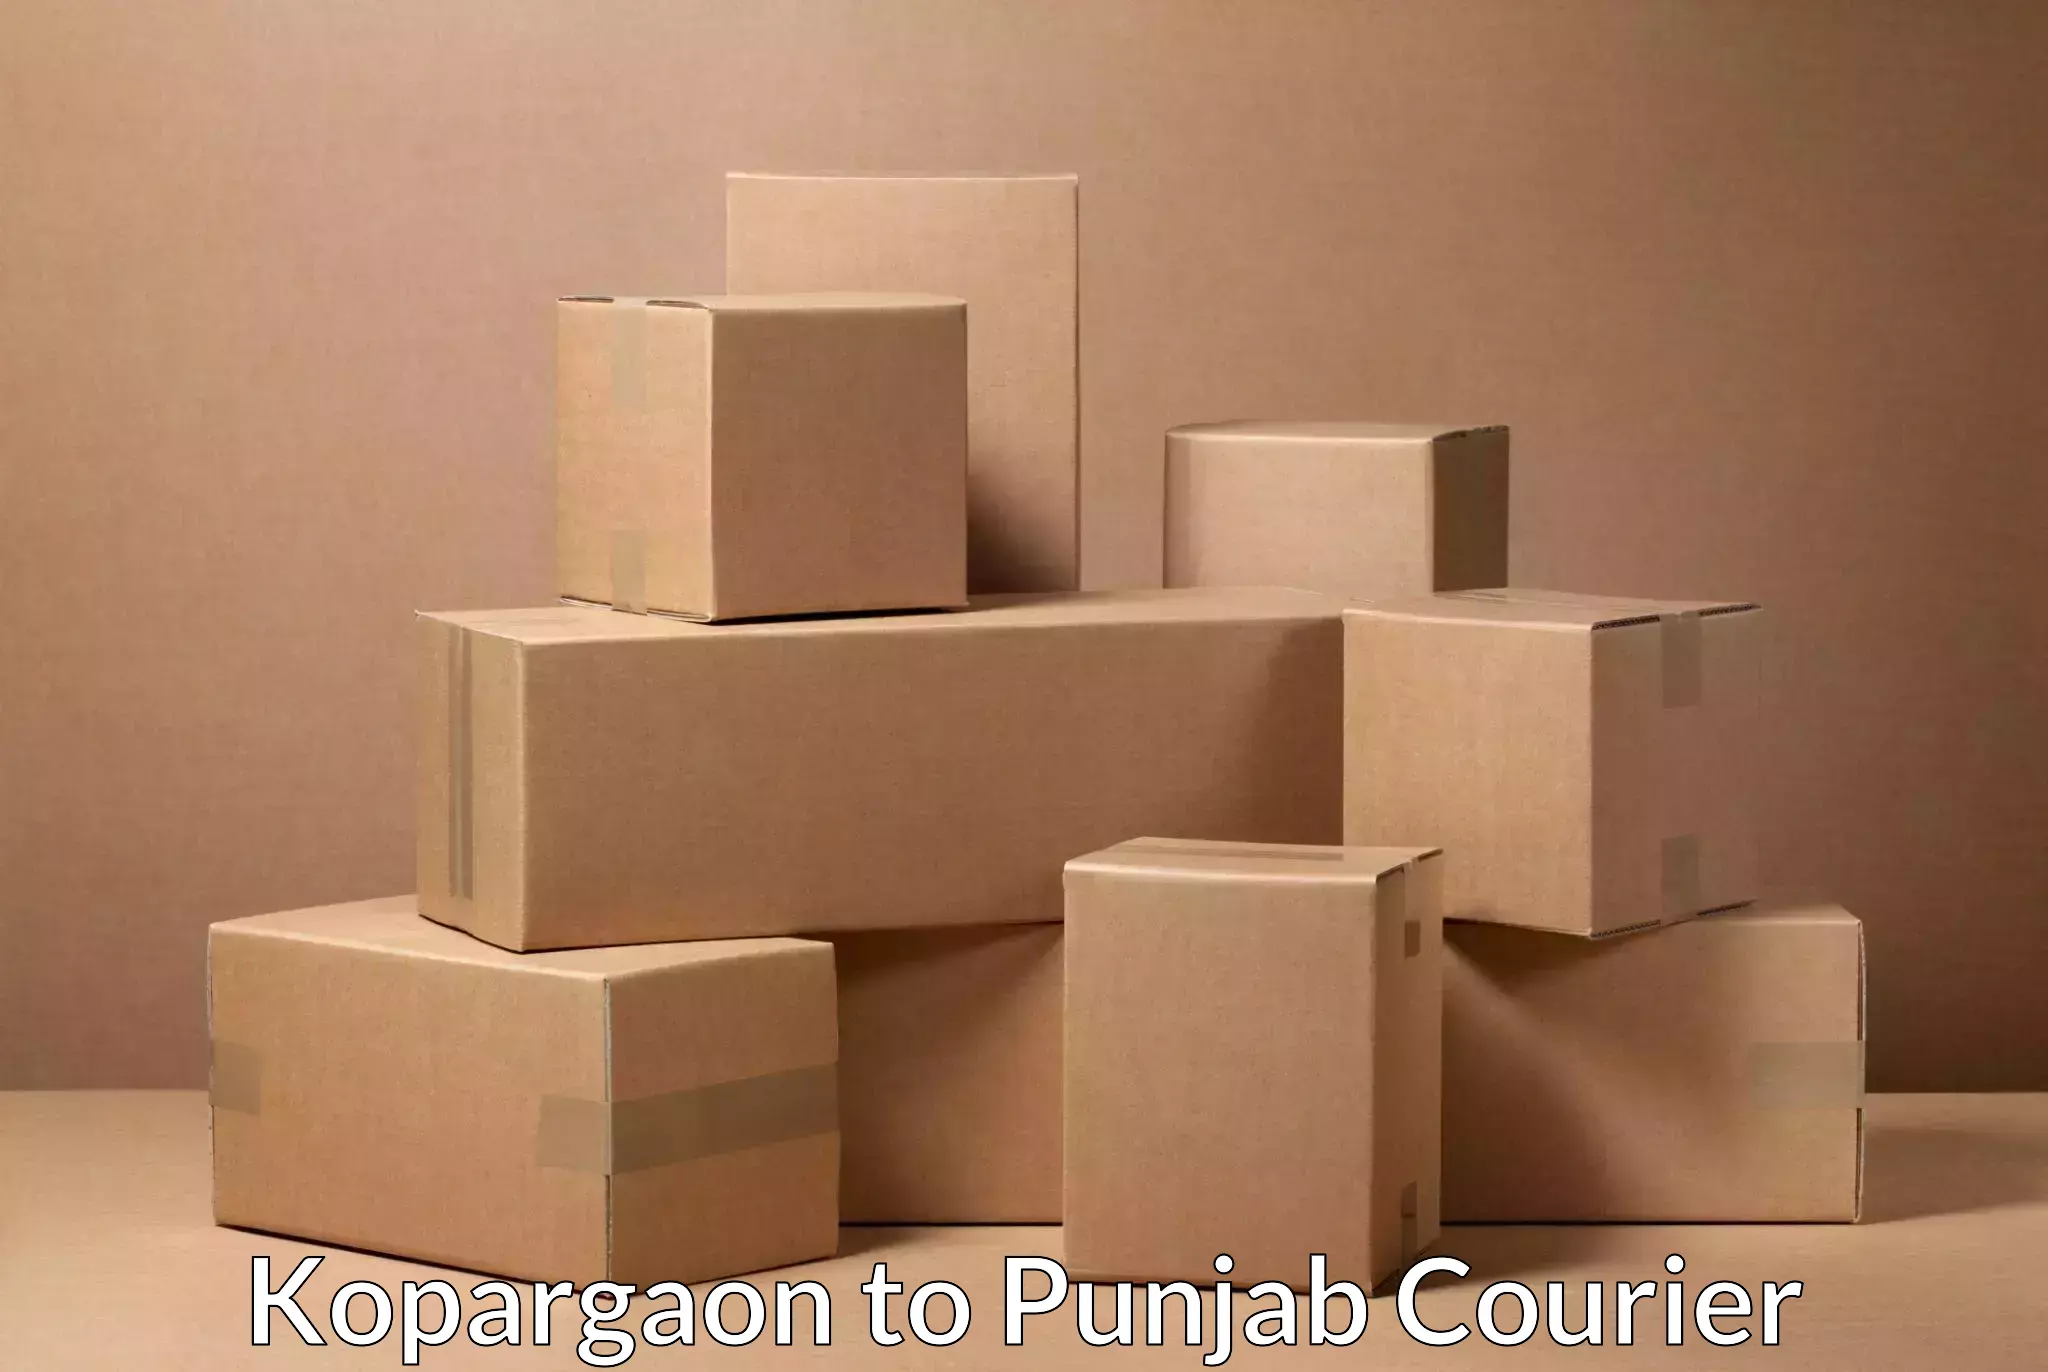 State-of-the-art courier technology Kopargaon to Gurdaspur